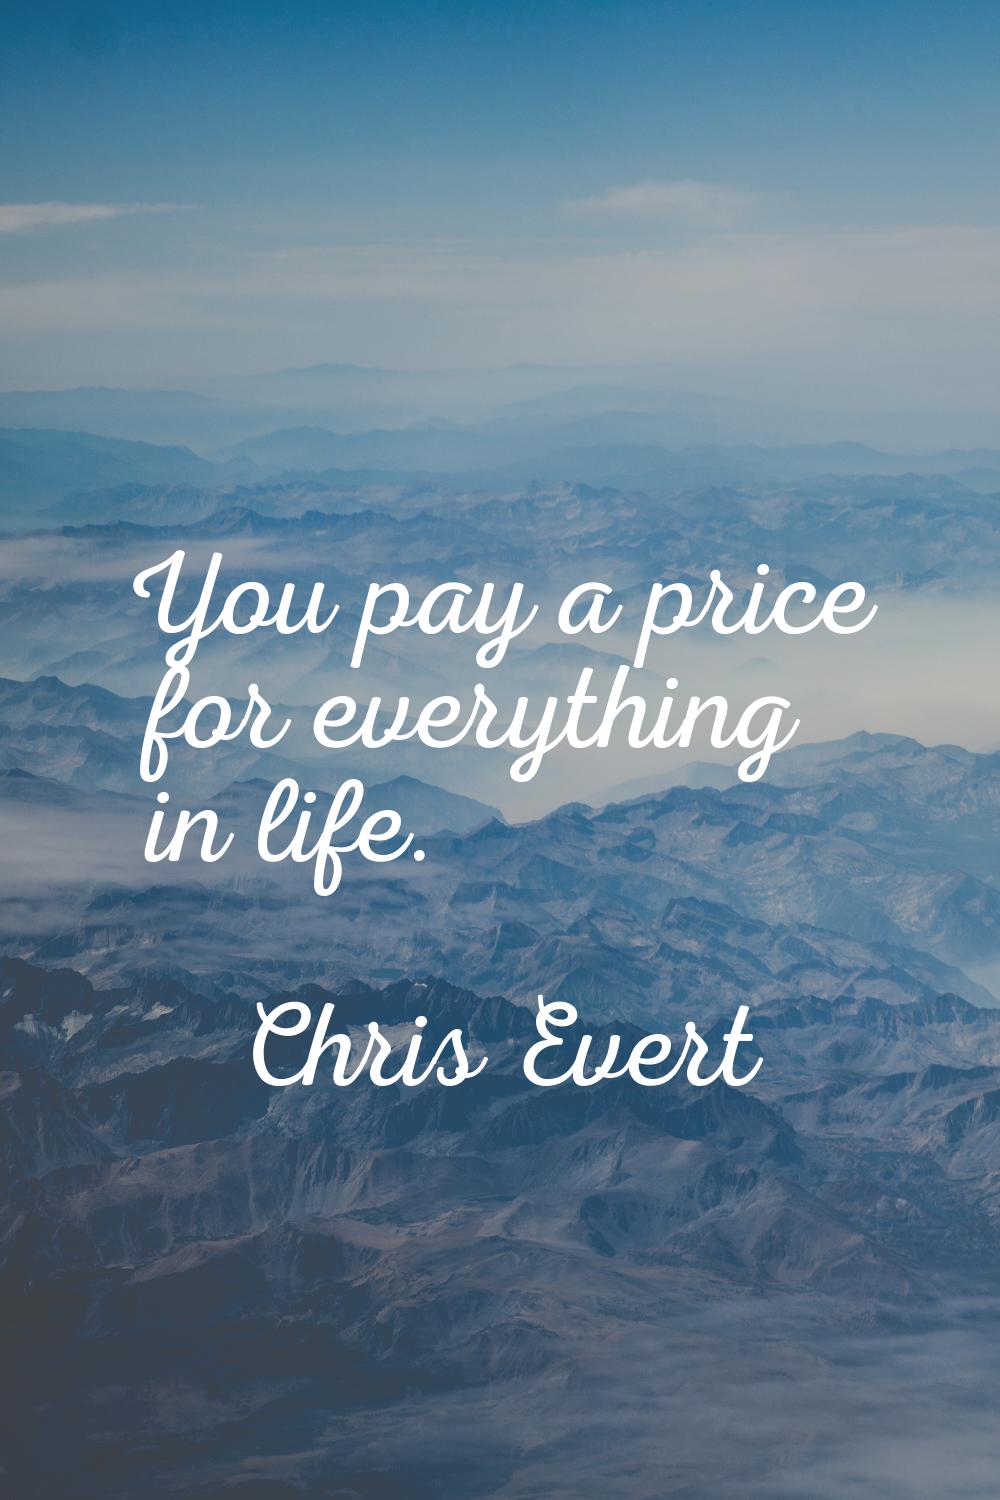 You pay a price for everything in life.